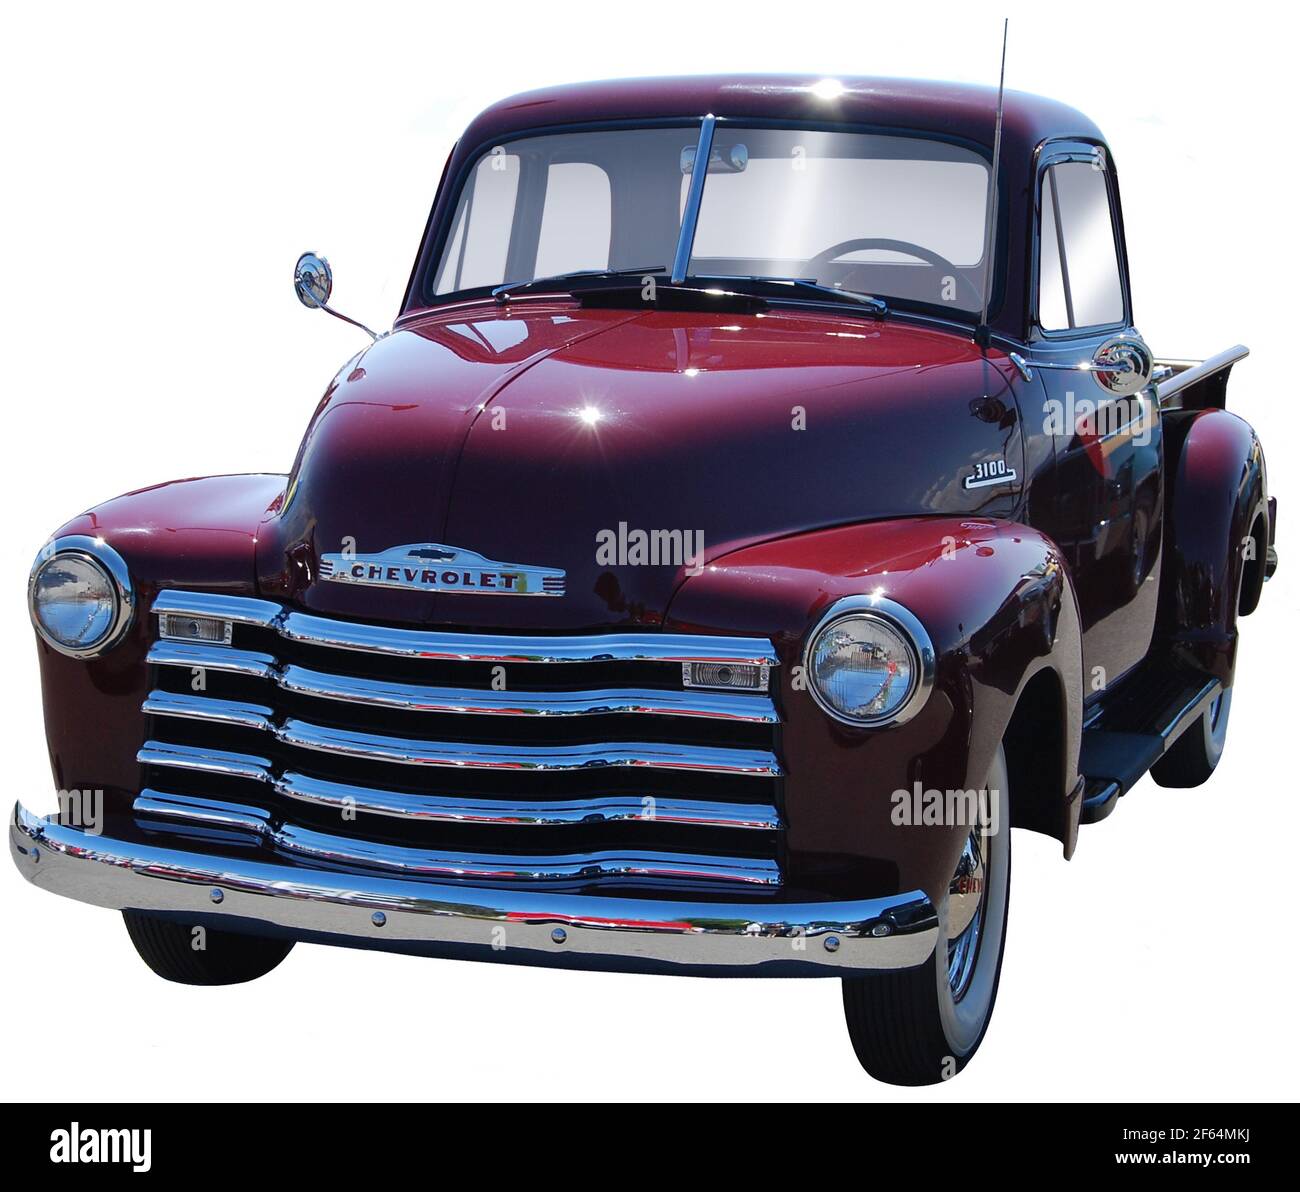 1949 red Chevy Pickup Truck with chrome grill. Stock Photo